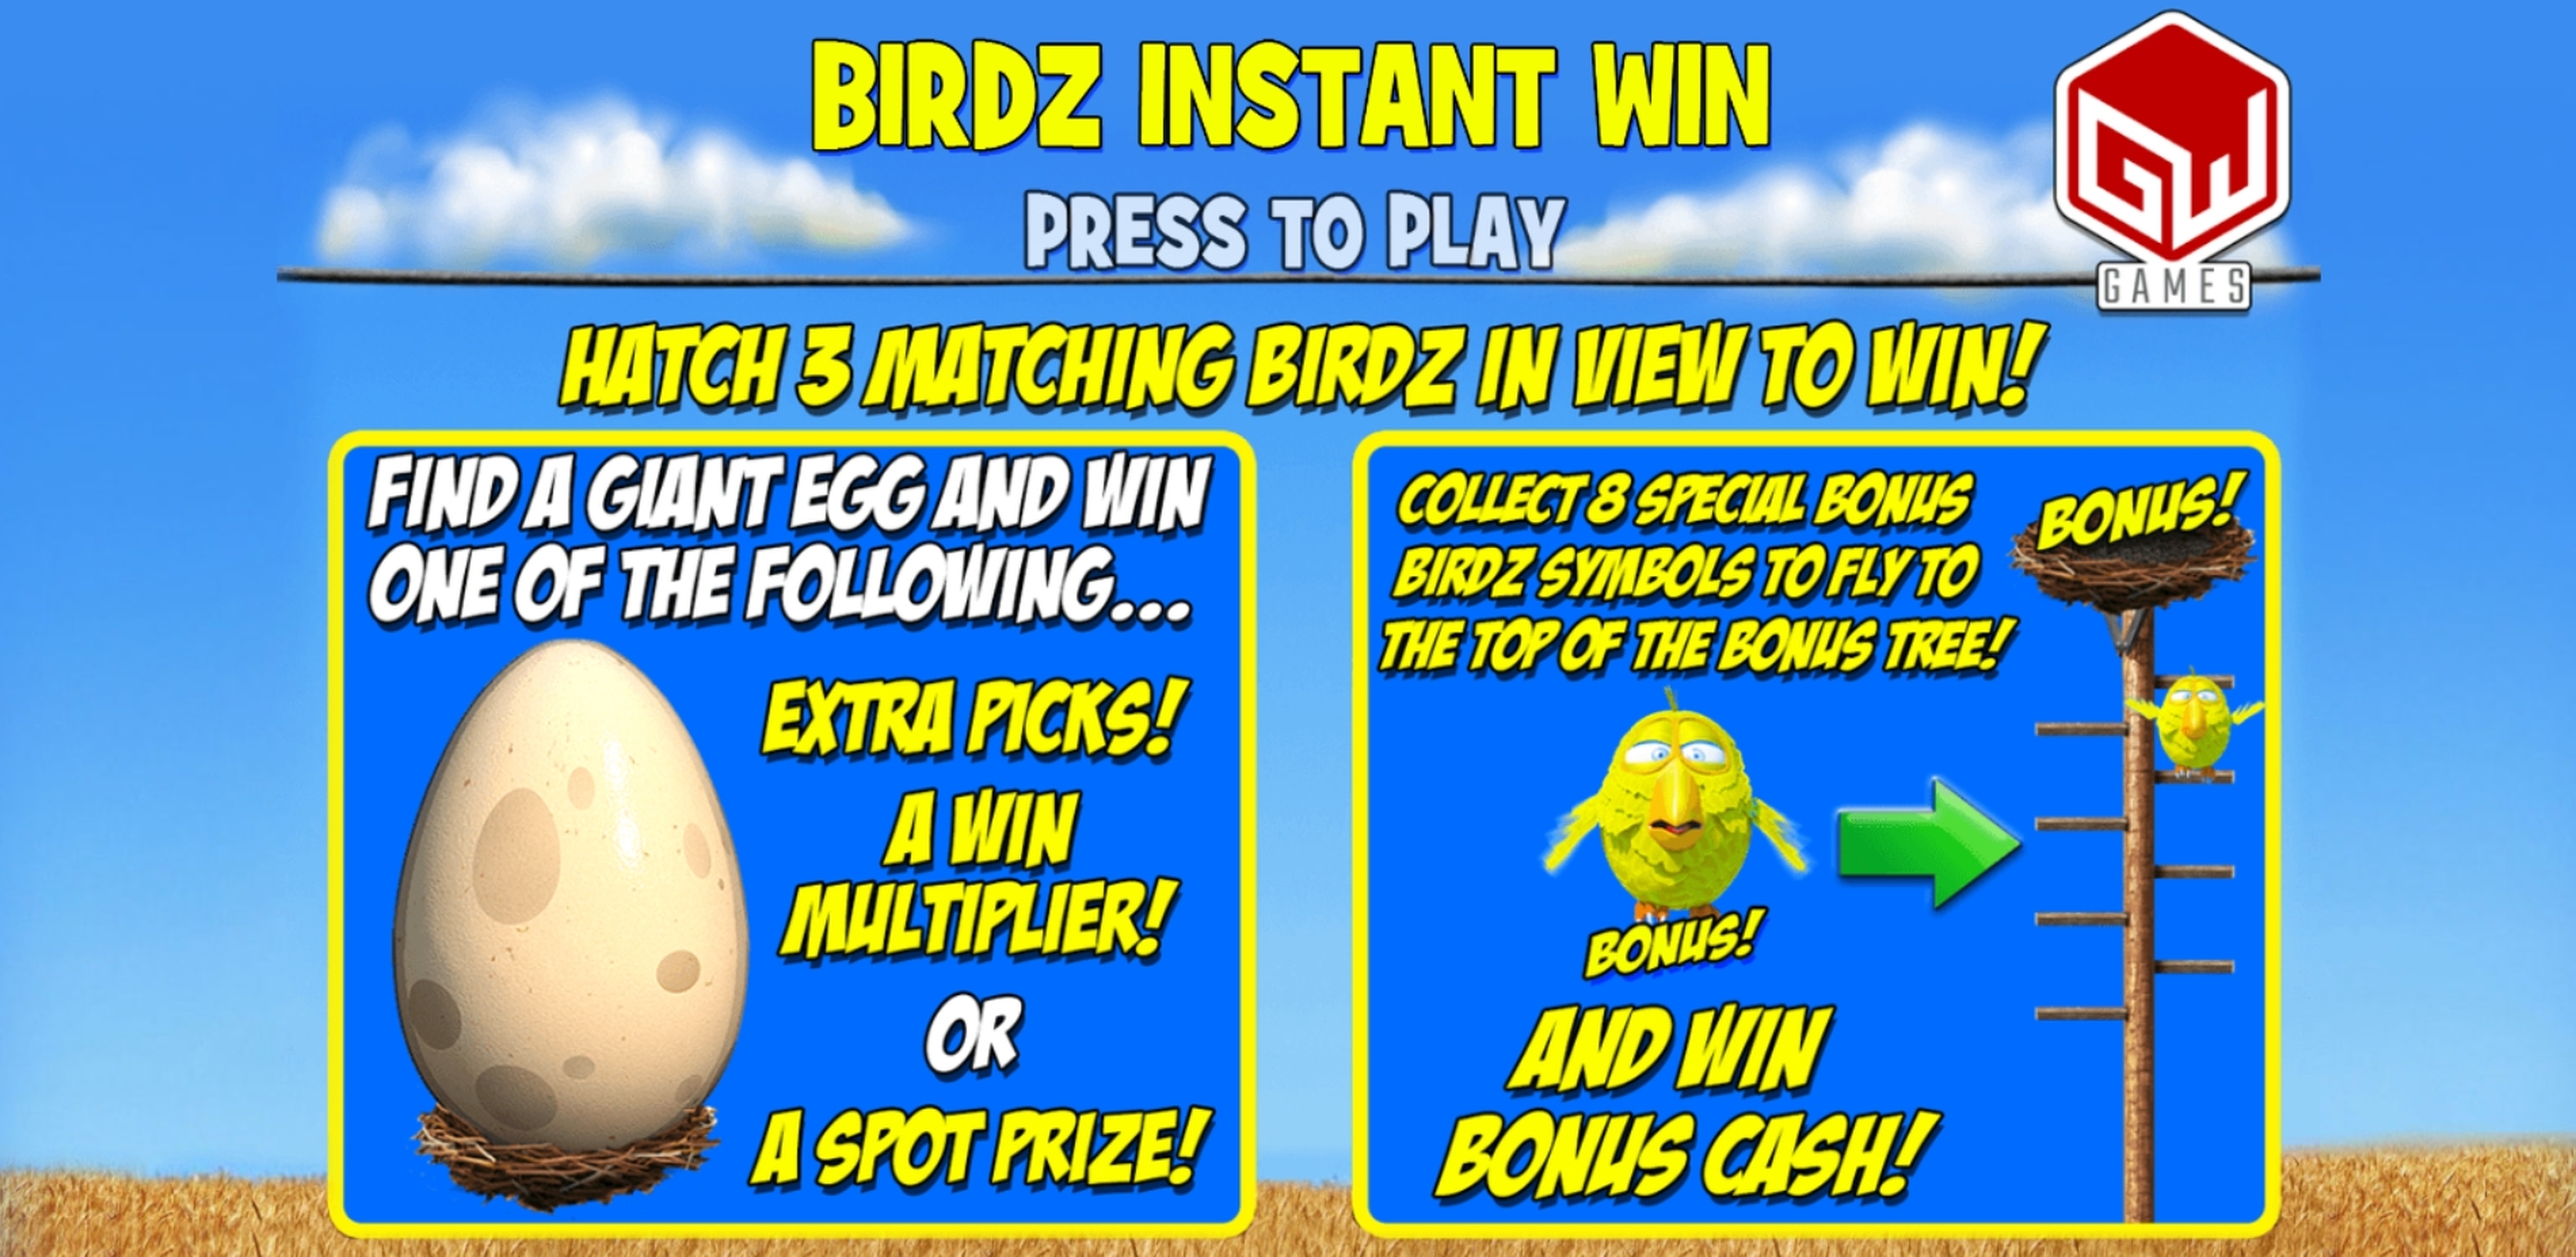 Play Birdz Instant Win Free Casino Slot Game by Games Warehouse